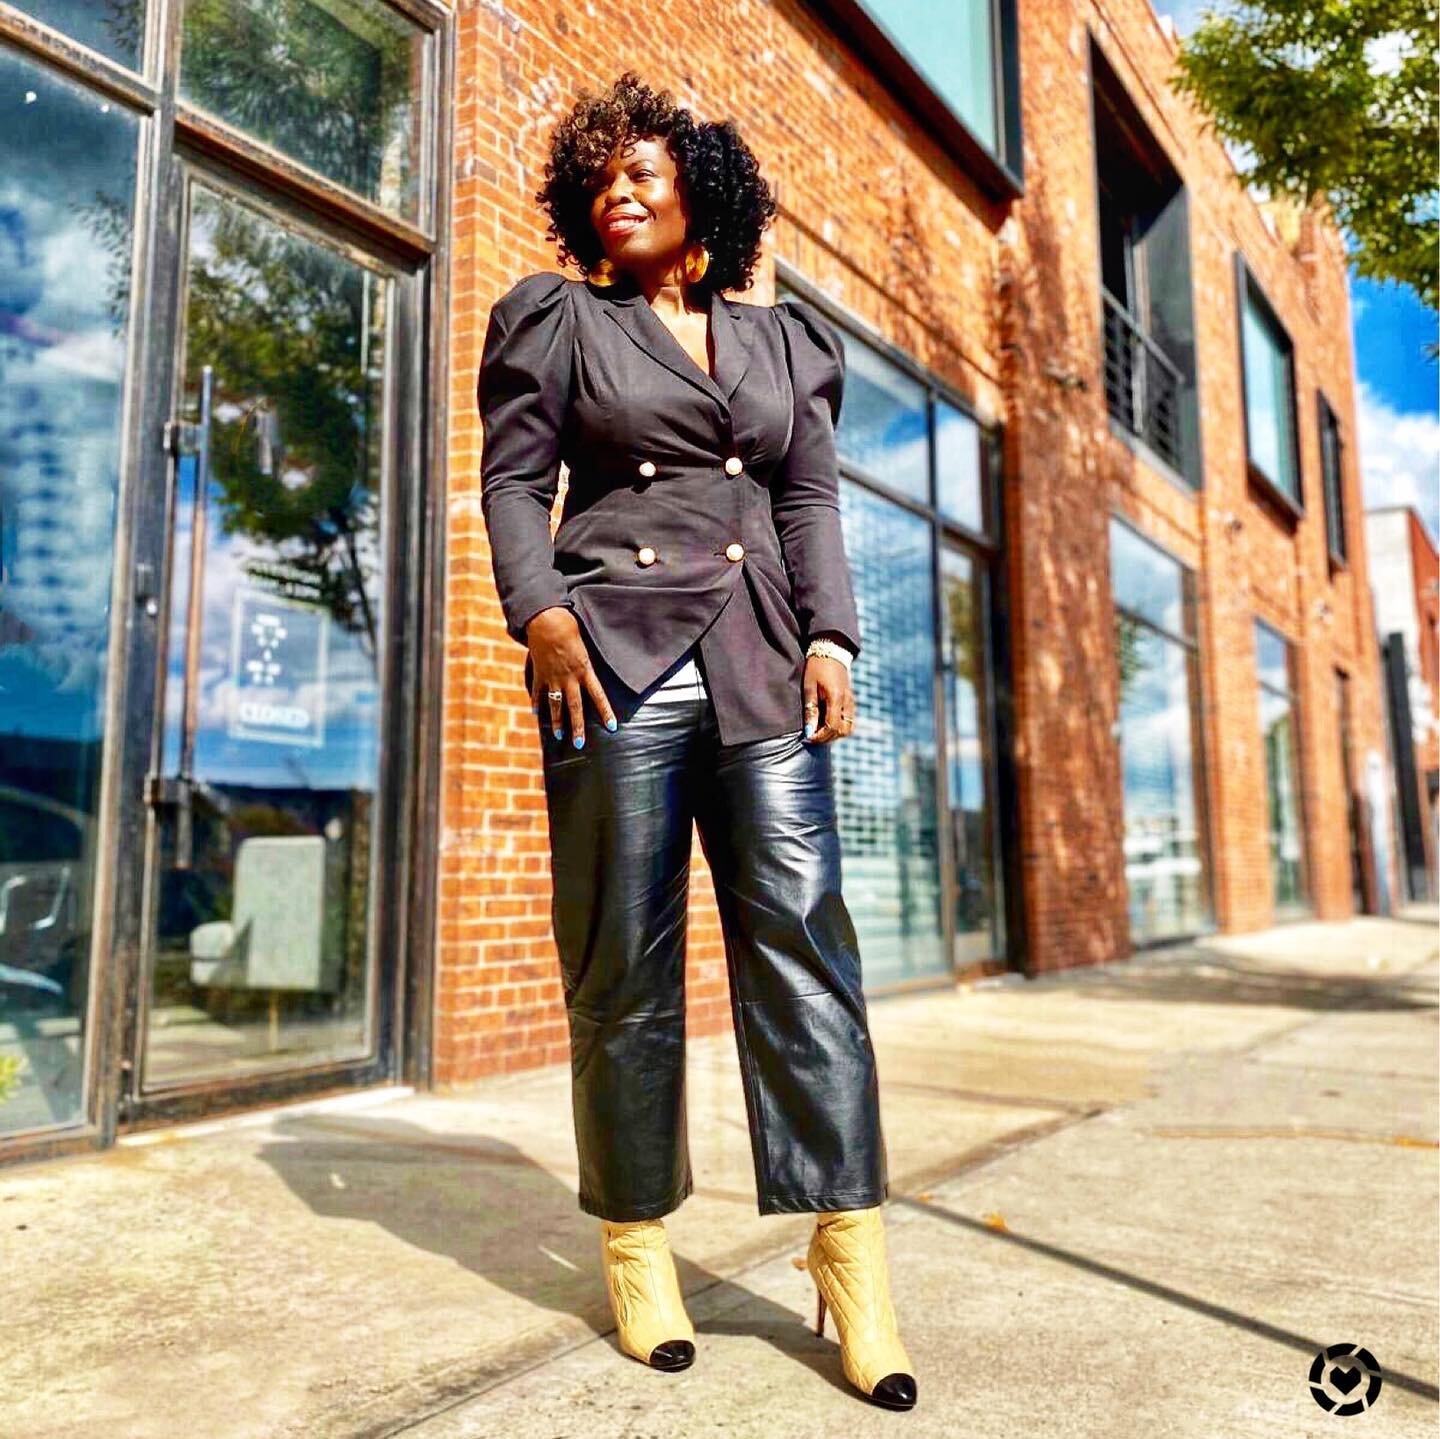 Be Who and What You Want...Period👑 #nonnegotiable 
.
Follow me on the @liketoknow.it app @liketoknow.it #liketkit http://liketk.it/2Y9wl 
.
 #quiltedchanel #sheingals #prettylittlething #creamboots